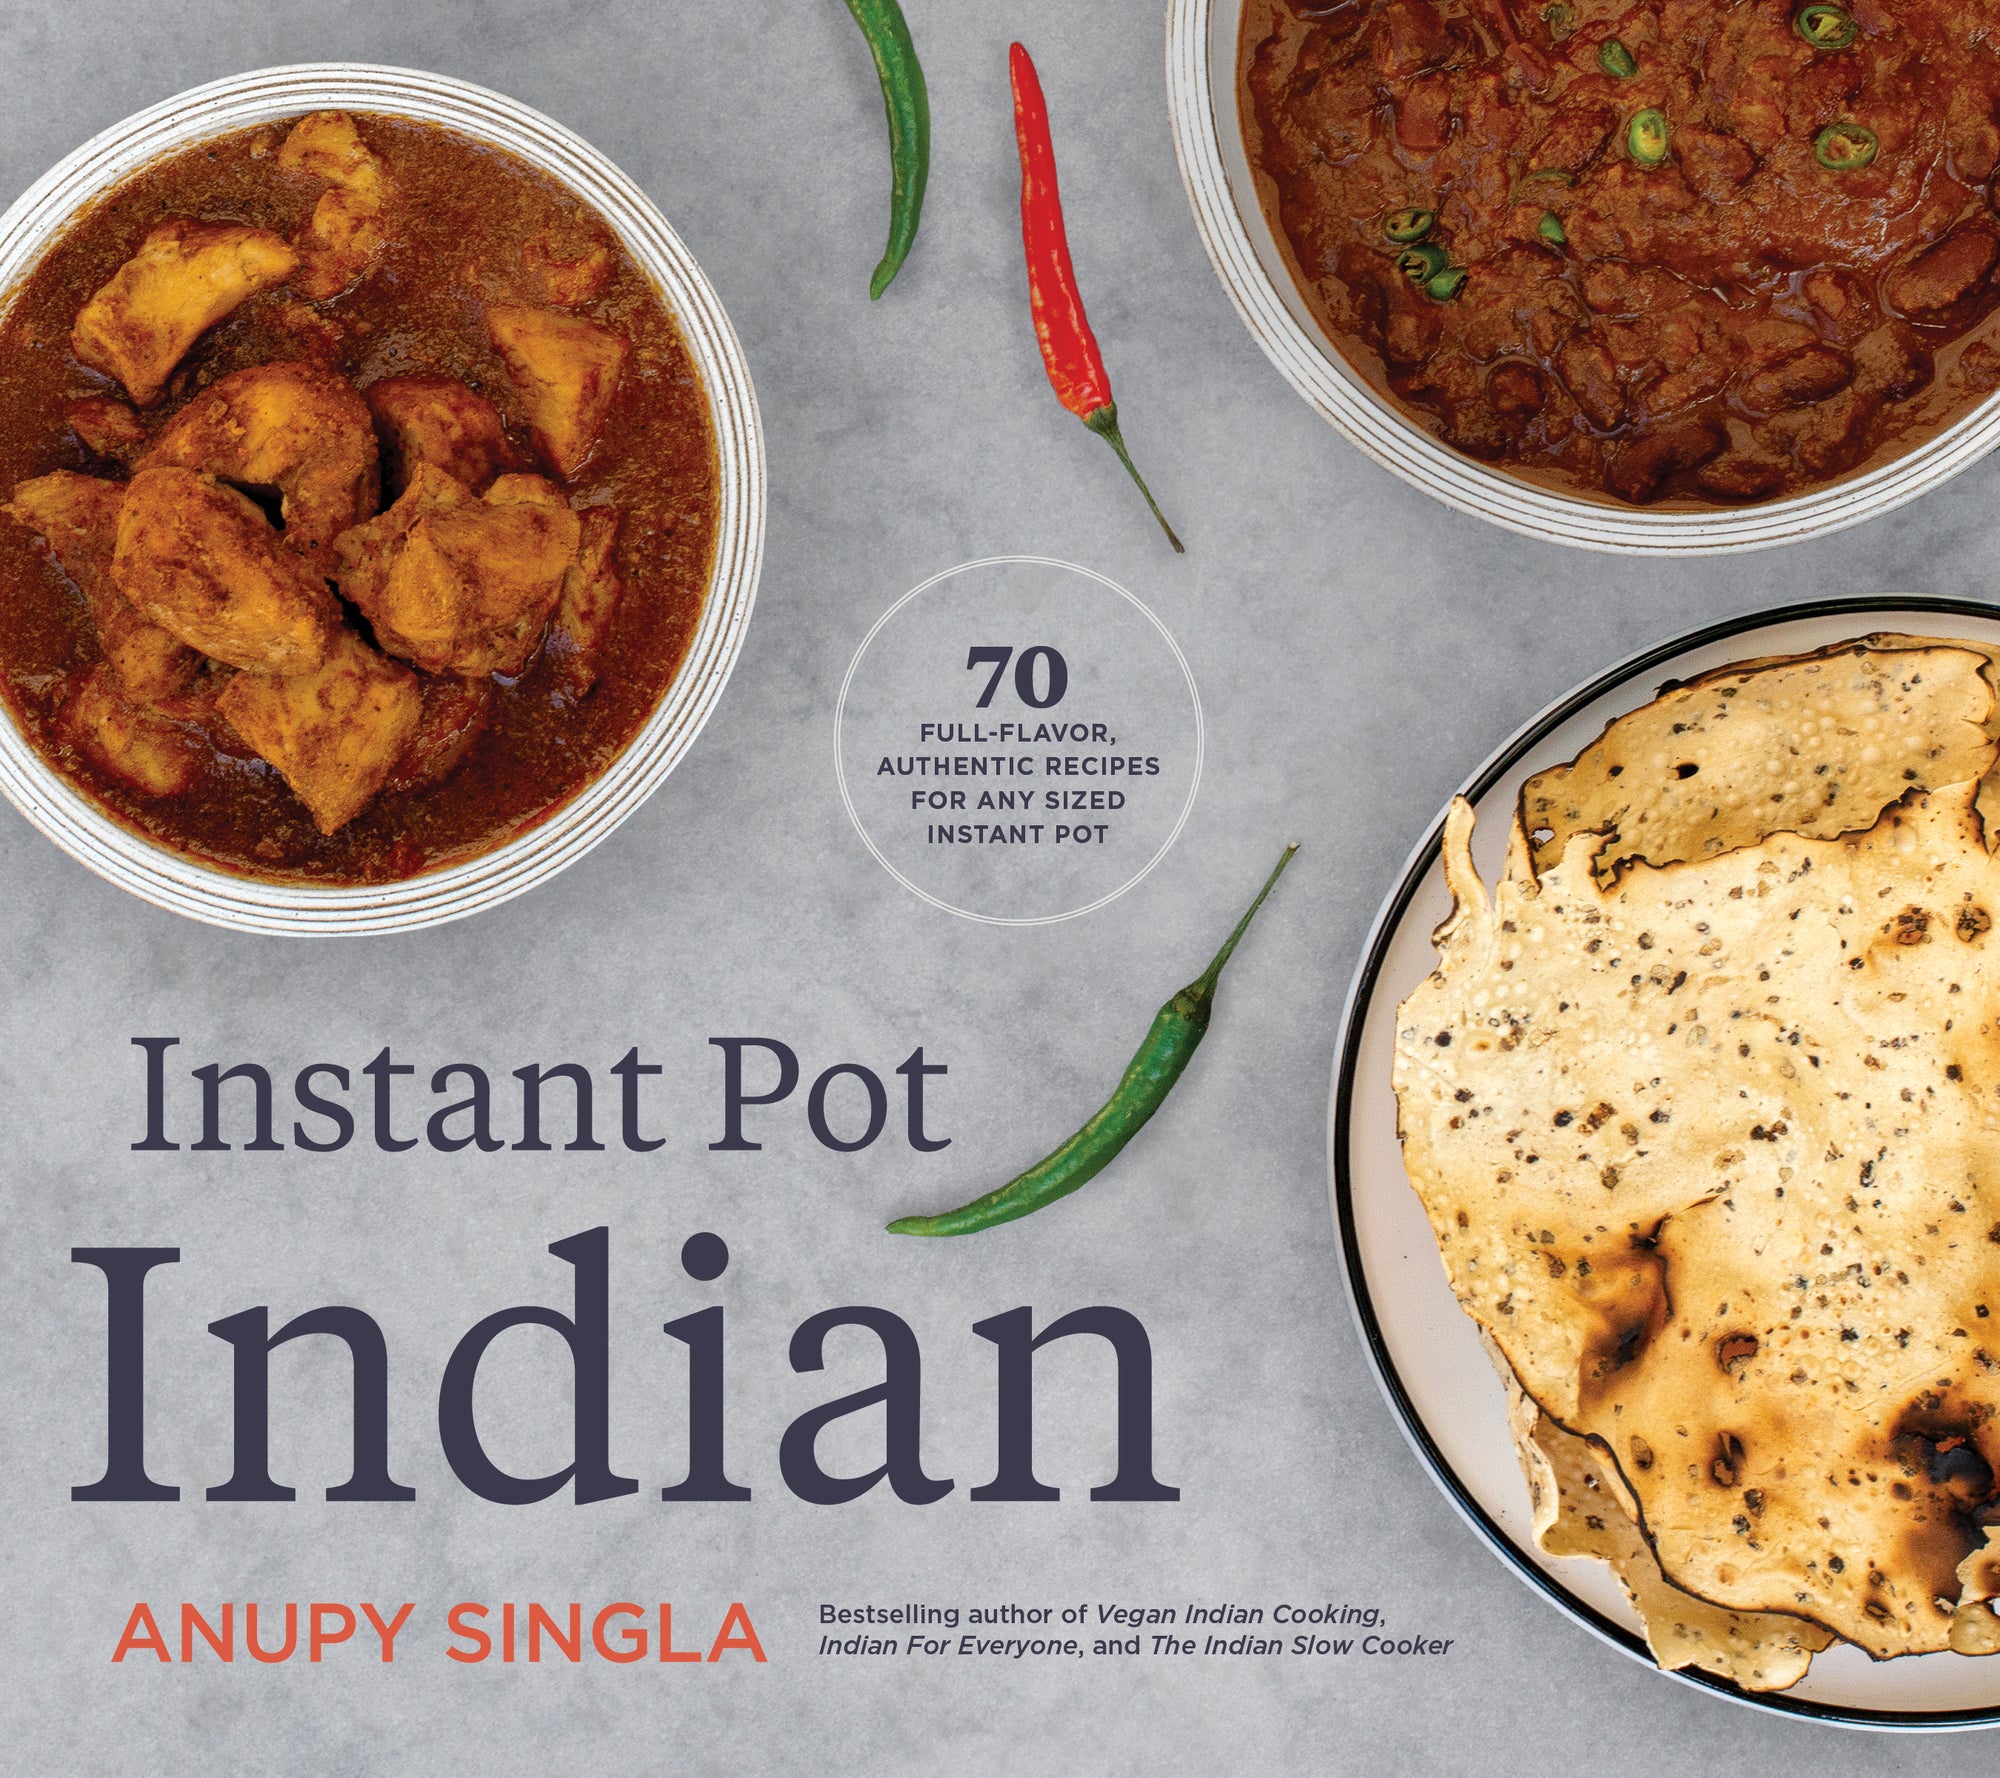 Amazing Meals and Instant Pot Indian Start with Prep: Mise en Place and Beyond